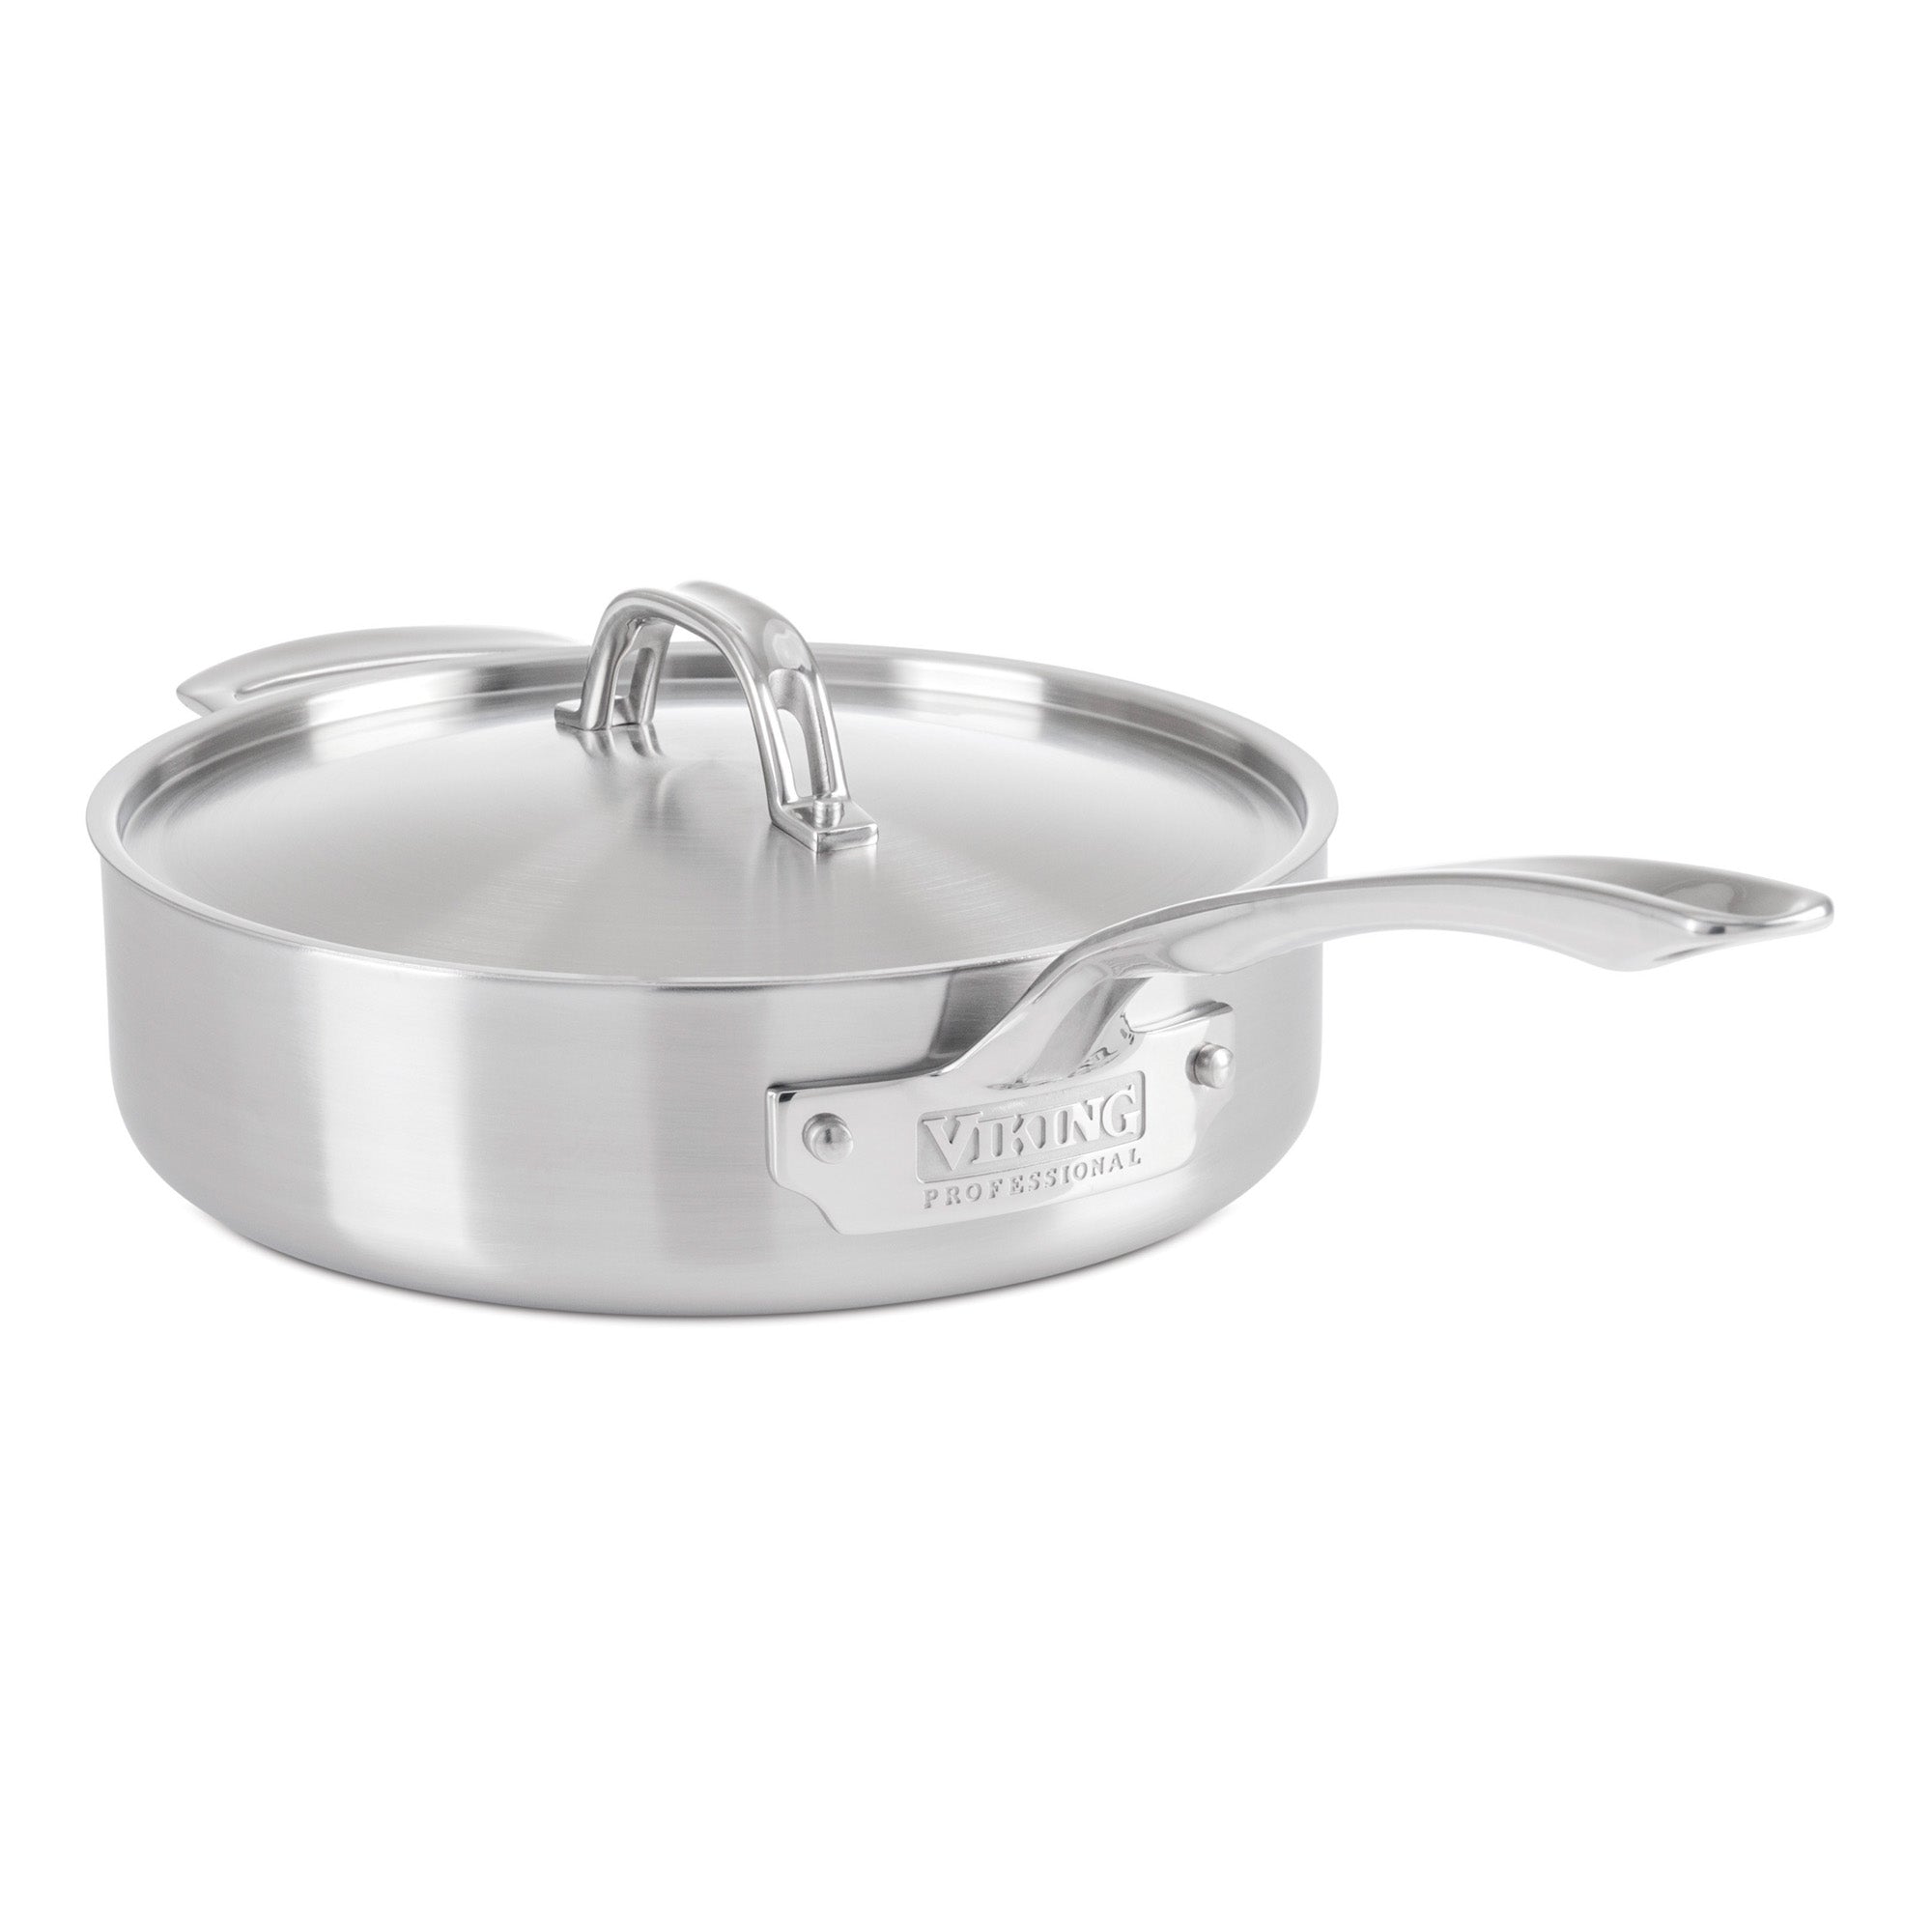 Viking Professional 5-Ply Stainless Steel 3.4-Quart Sauté Pan with Metal Lid